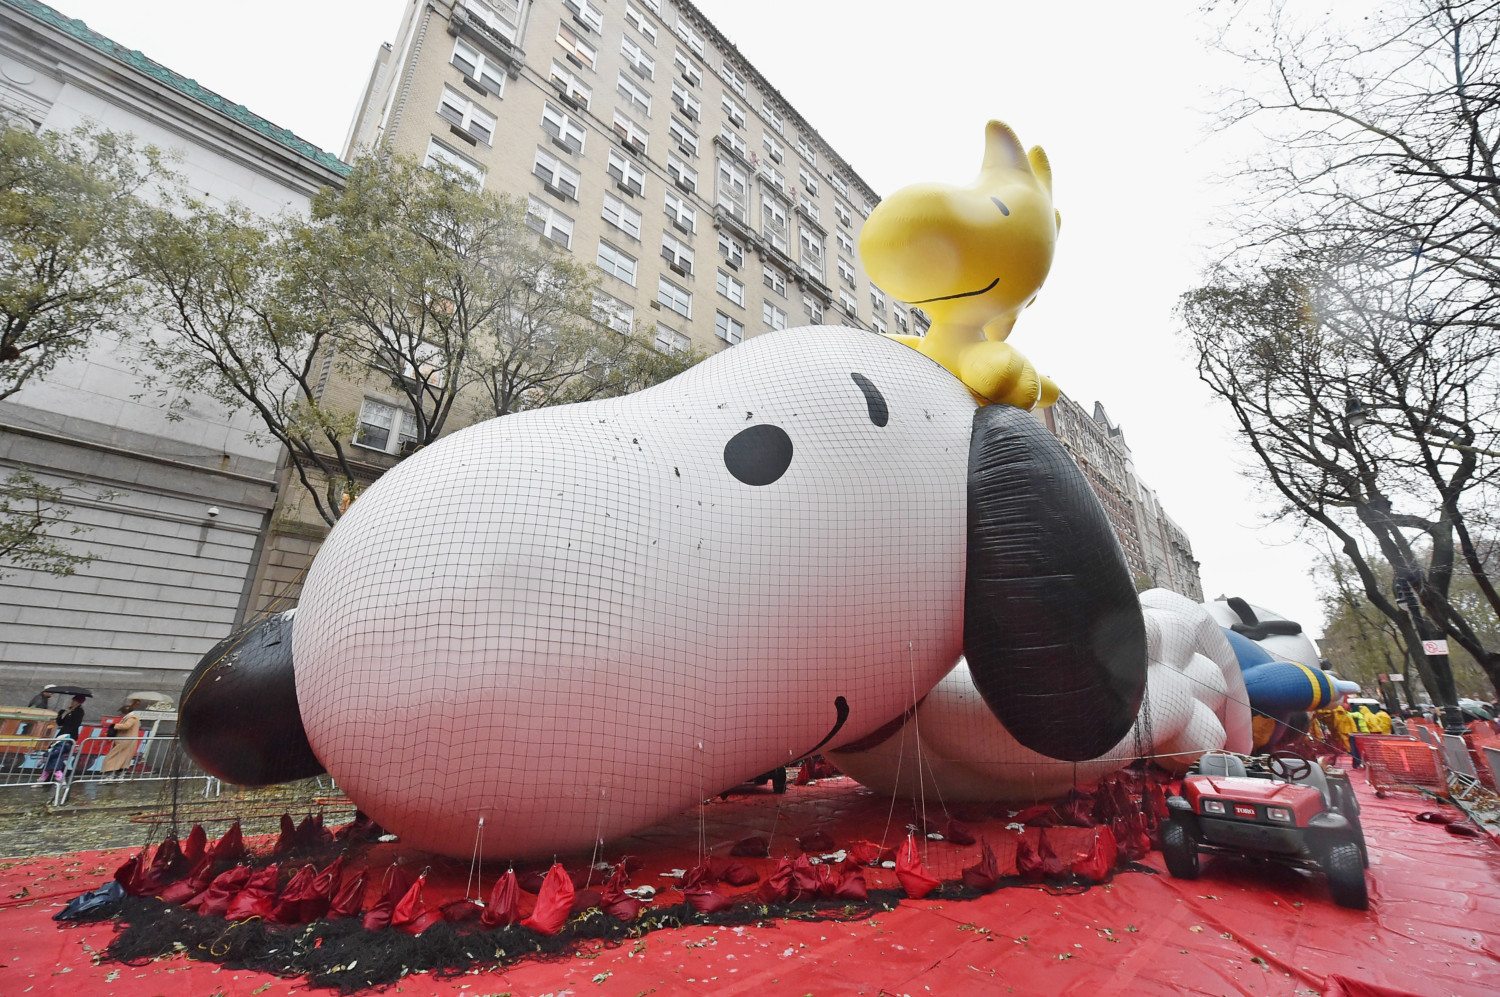 88th Annual Macy's Thanksgiving Day Parade Rehearsals - Inflation Eve